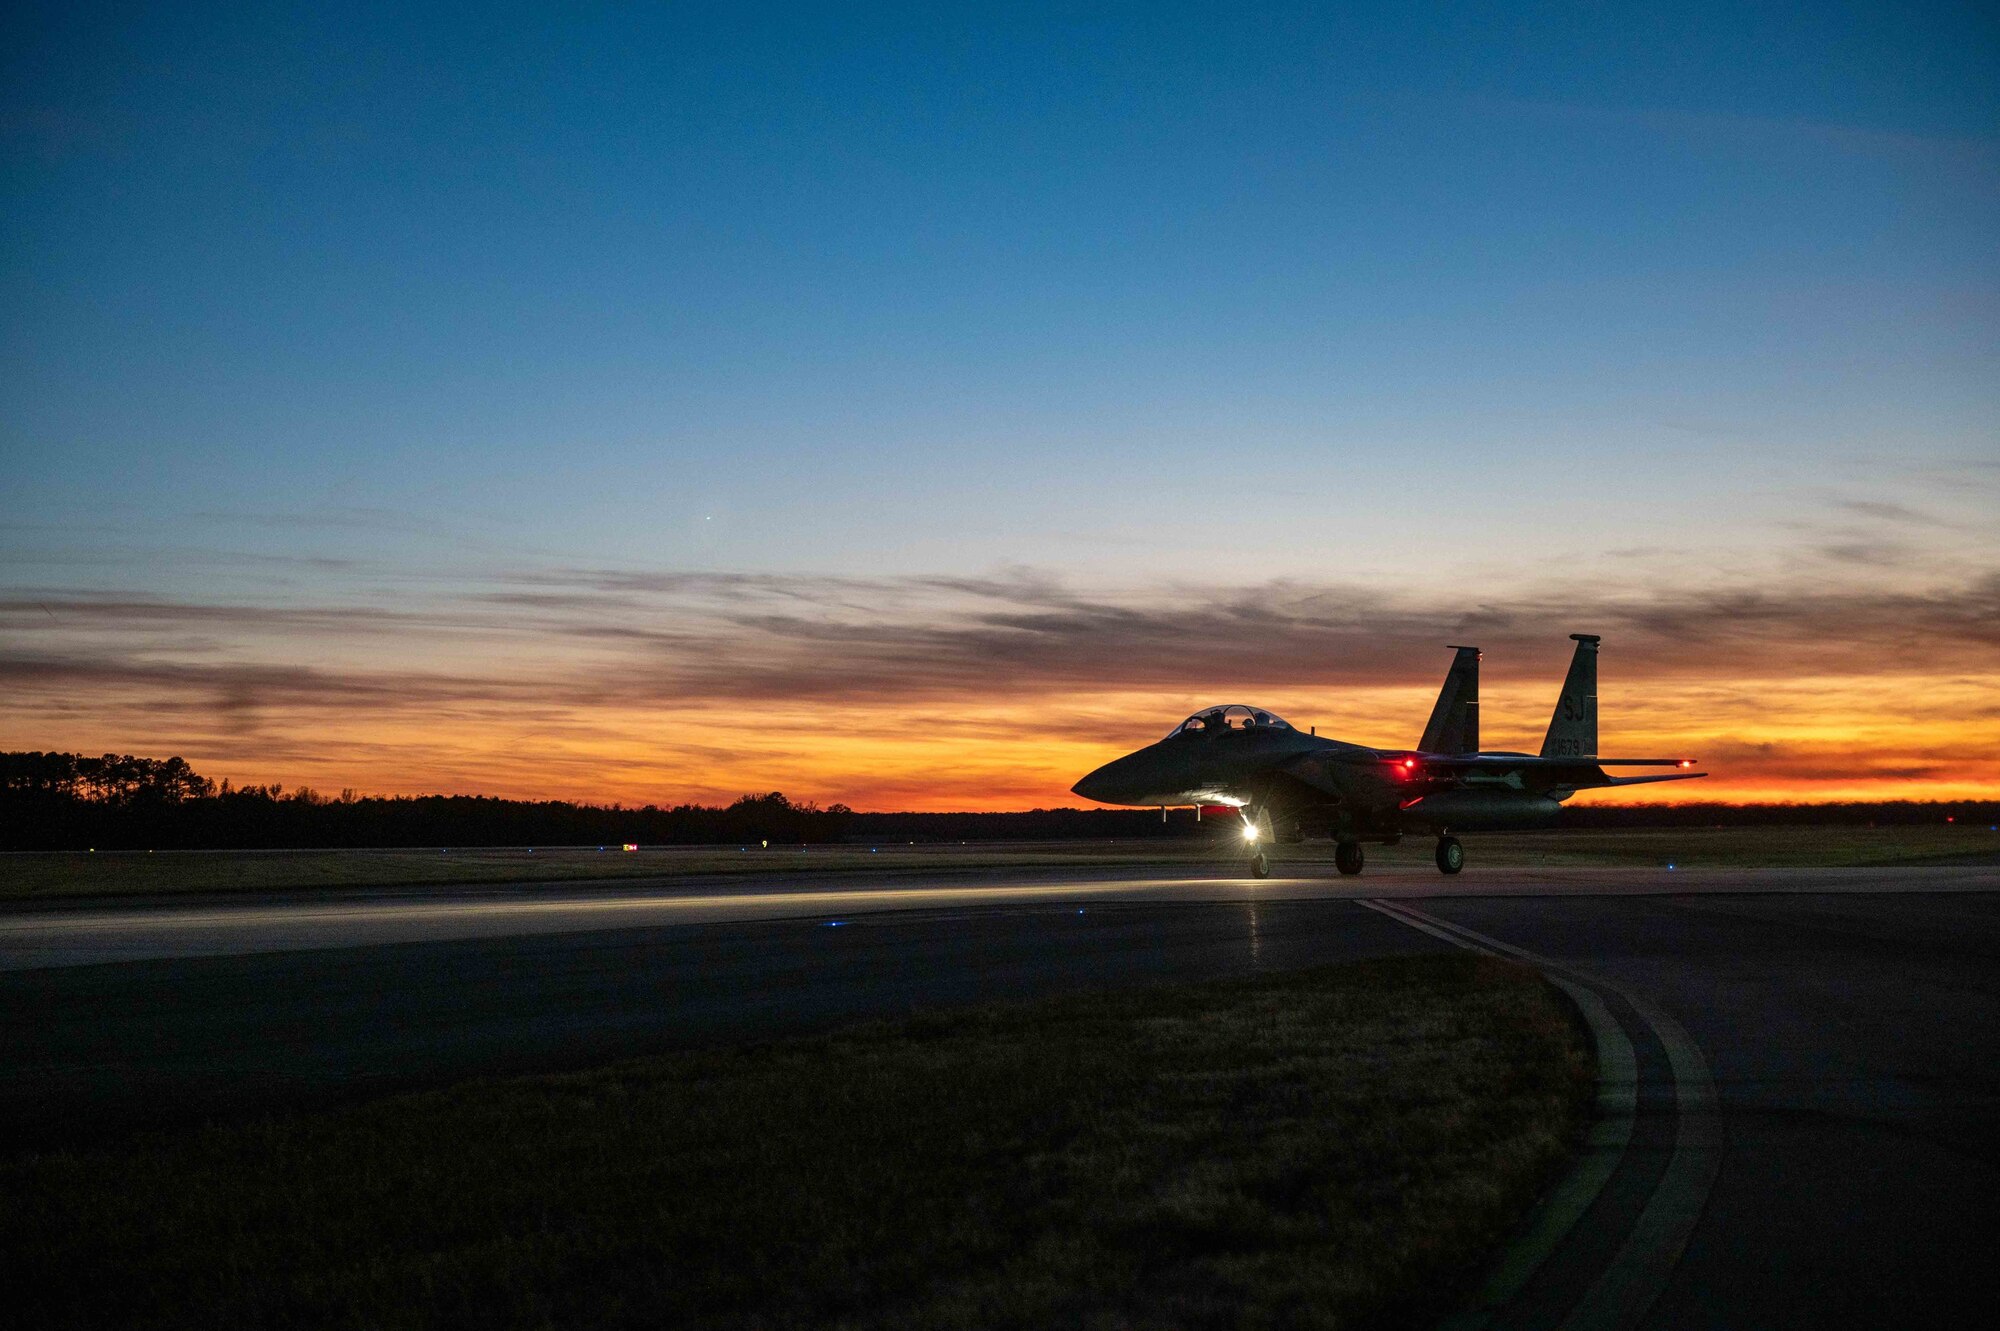 A F-15E Strike Eagle aircraft prepares for take off at Seymour Johnson Air Force Base, North Carolina, Nov. 29, 2021. The aircraft uses two crew members, a pilot and a weapon systems officer to fly the aircraft. (U.S. Air Force photo by Airman 1st Class Sabrina Fuller)